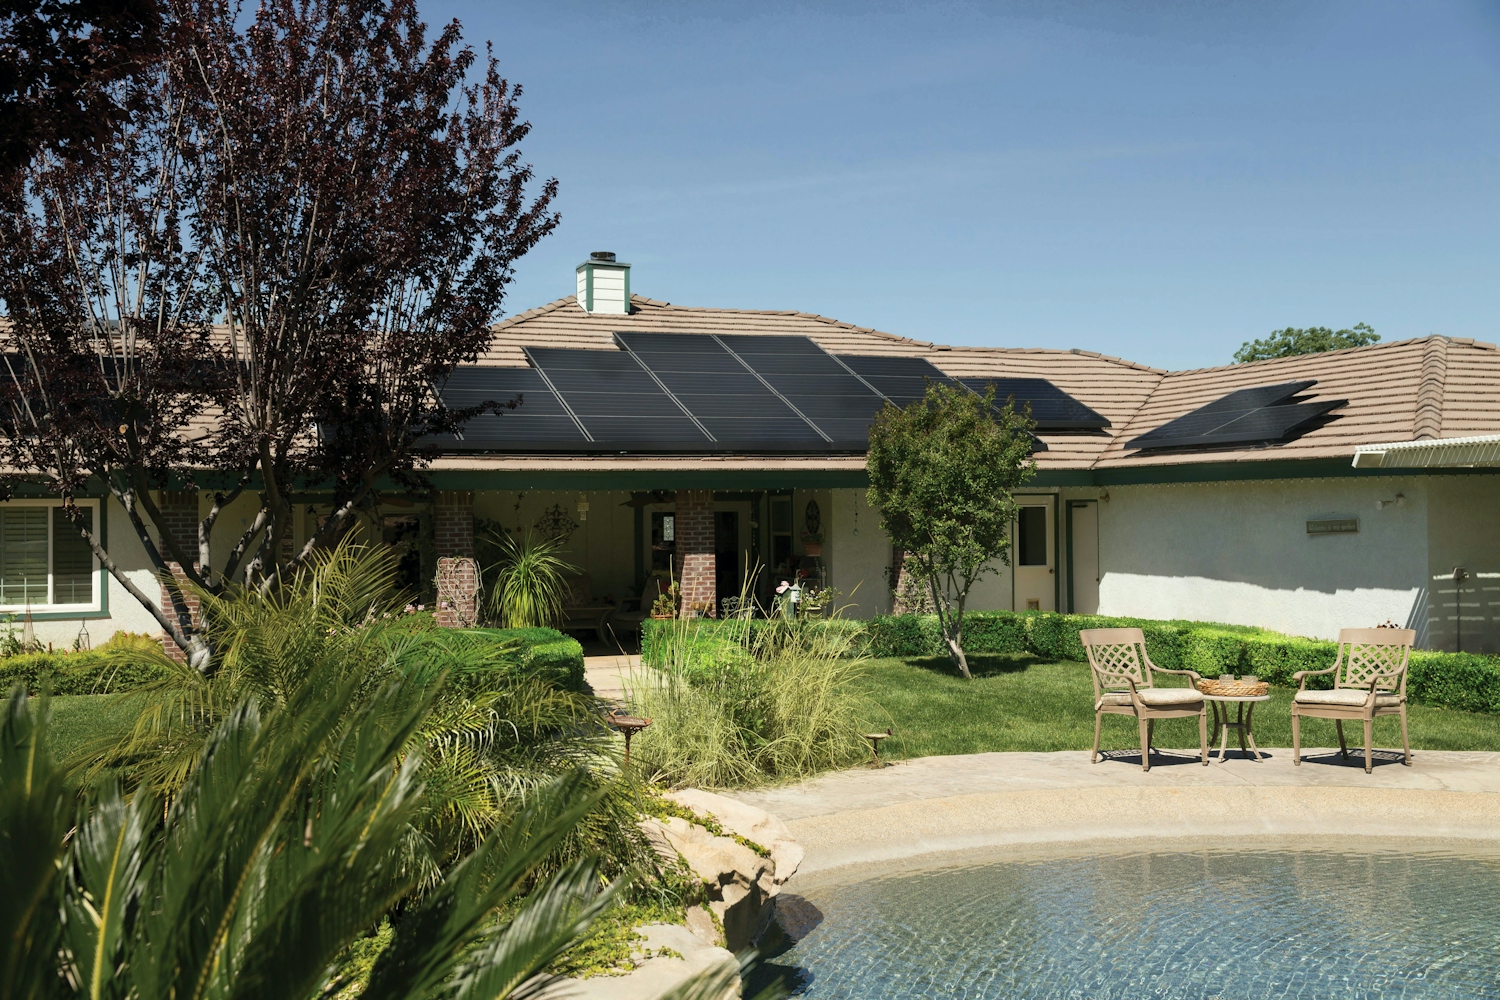 Black solar panels on brown roof of house with pool